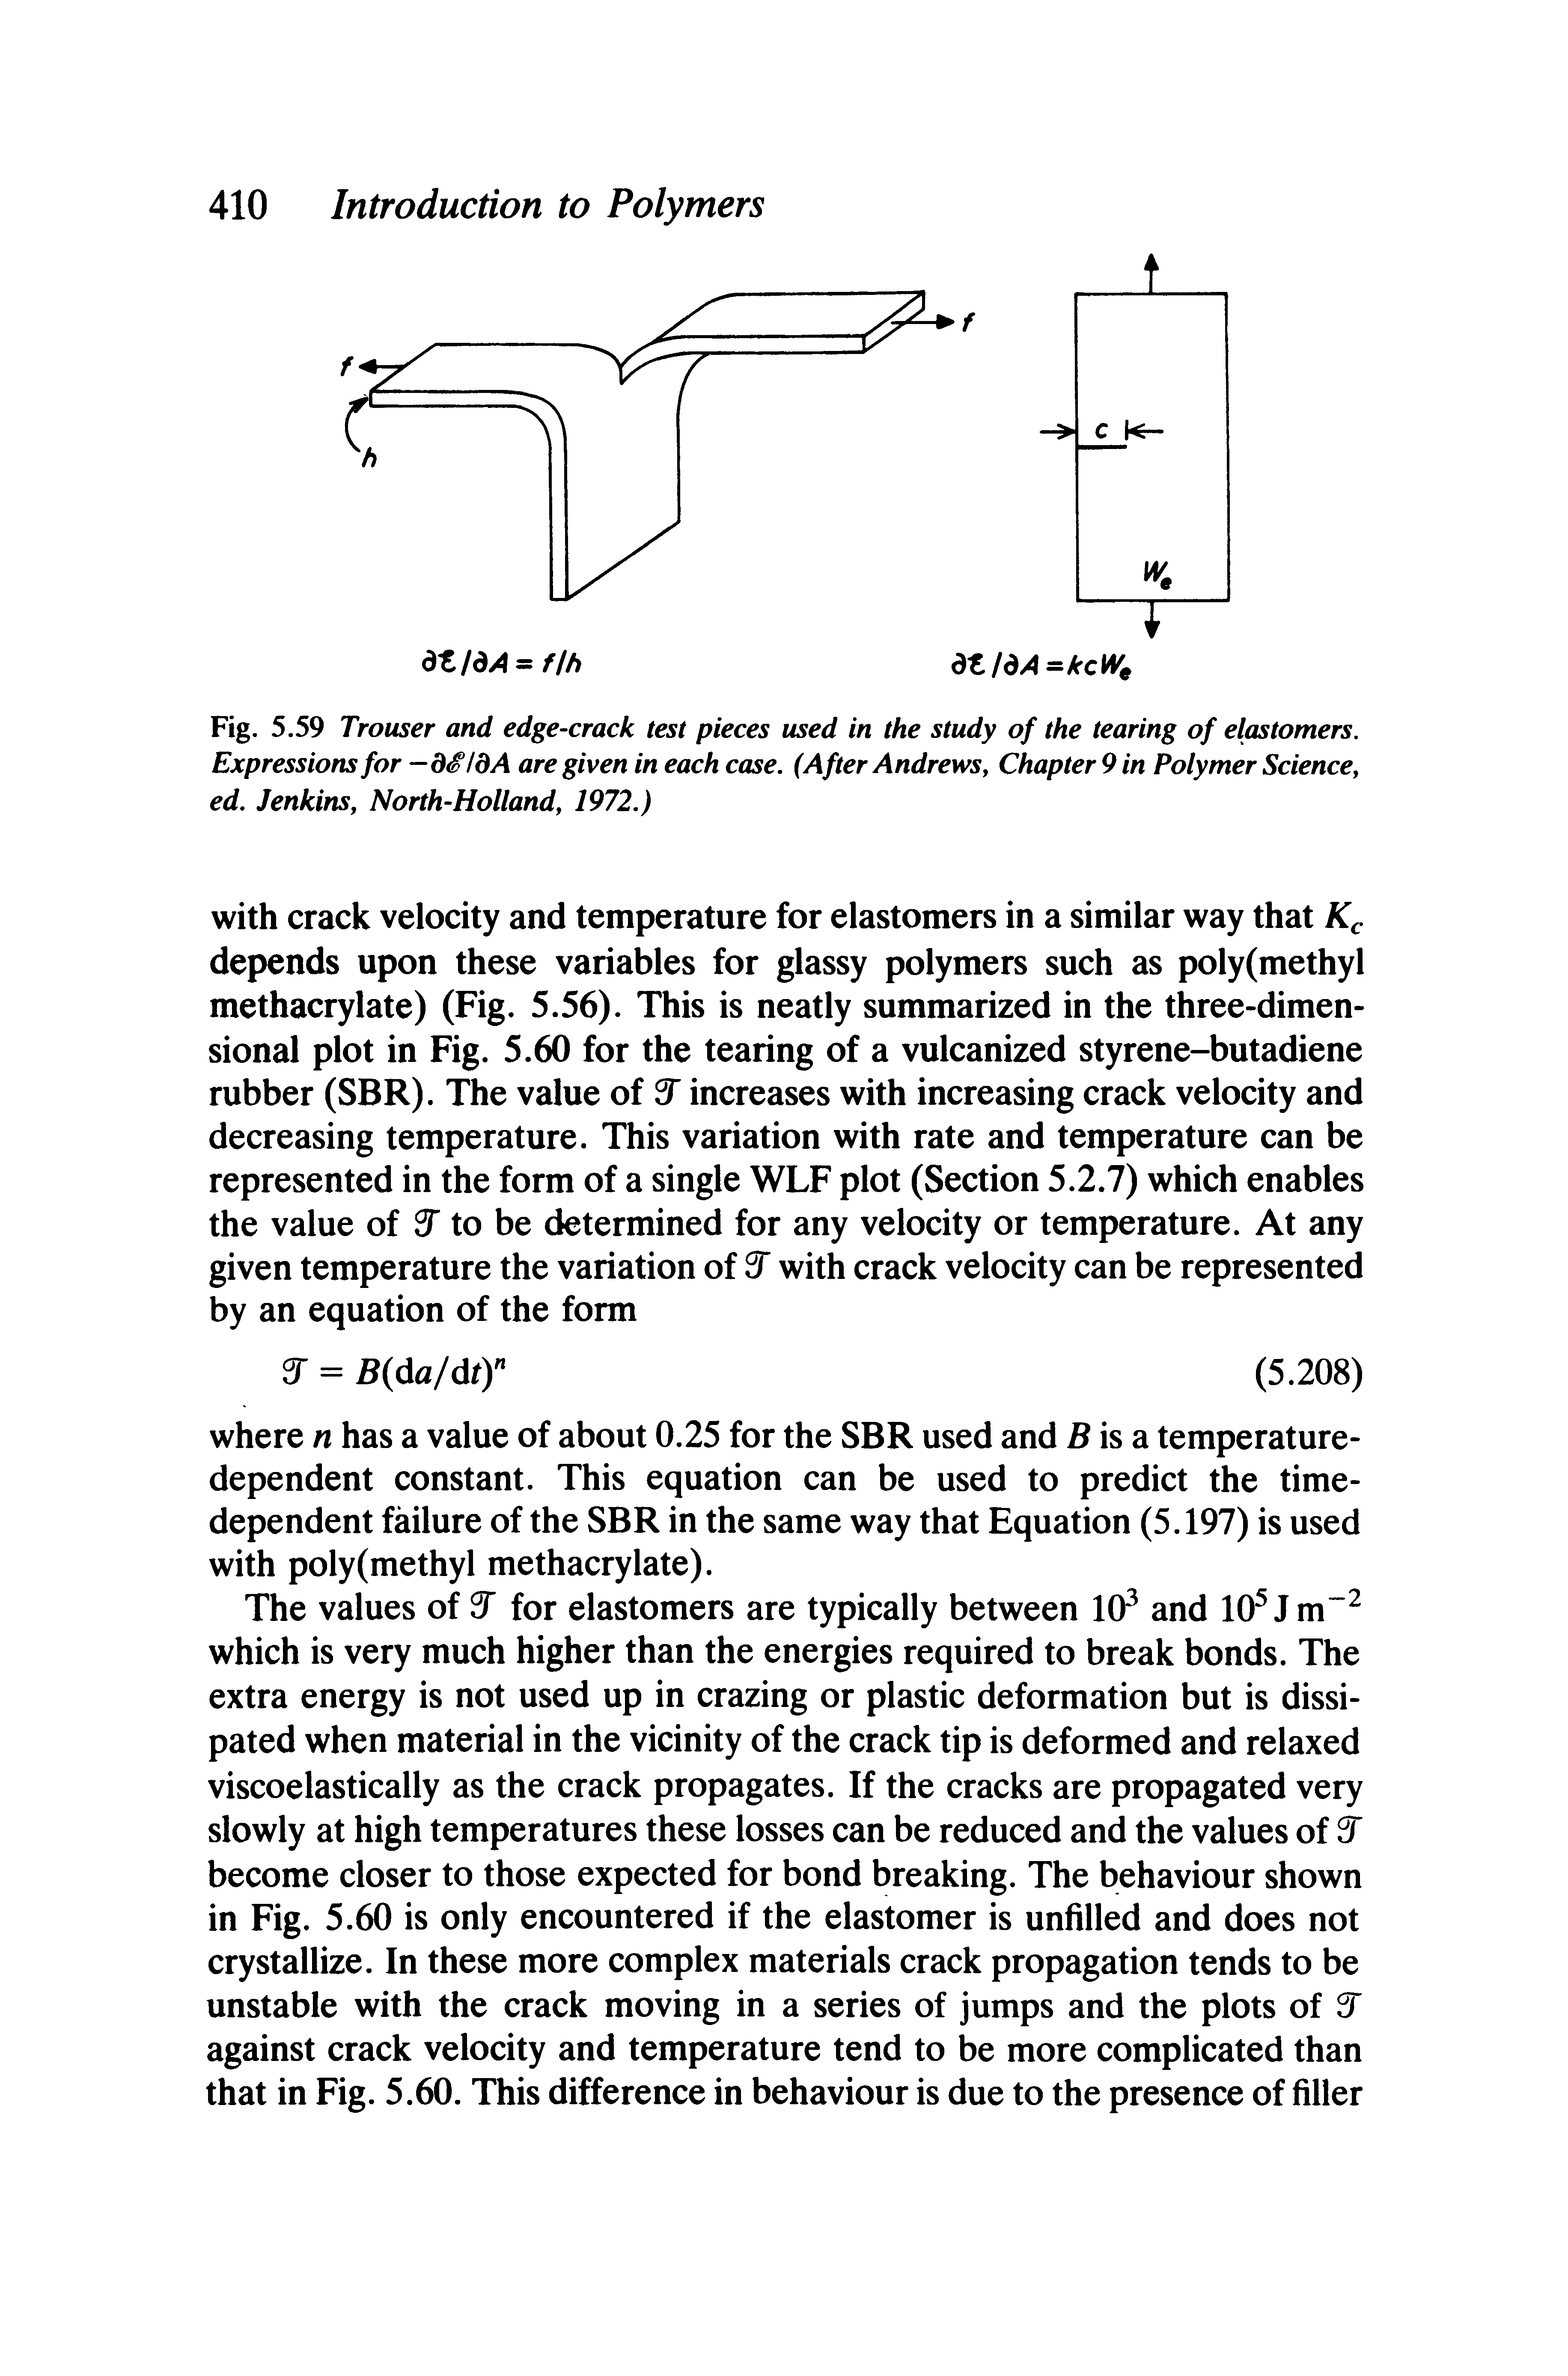 Fig. 5.59 Trouser and edge-crack test pieces used in the study of the tearing of elastomers. Expressions for -d ldA are given in each case. (After Andrewsy Chapter 9 in Polymer Science ed. Jenkinsy North-Hollandy 1972.)...